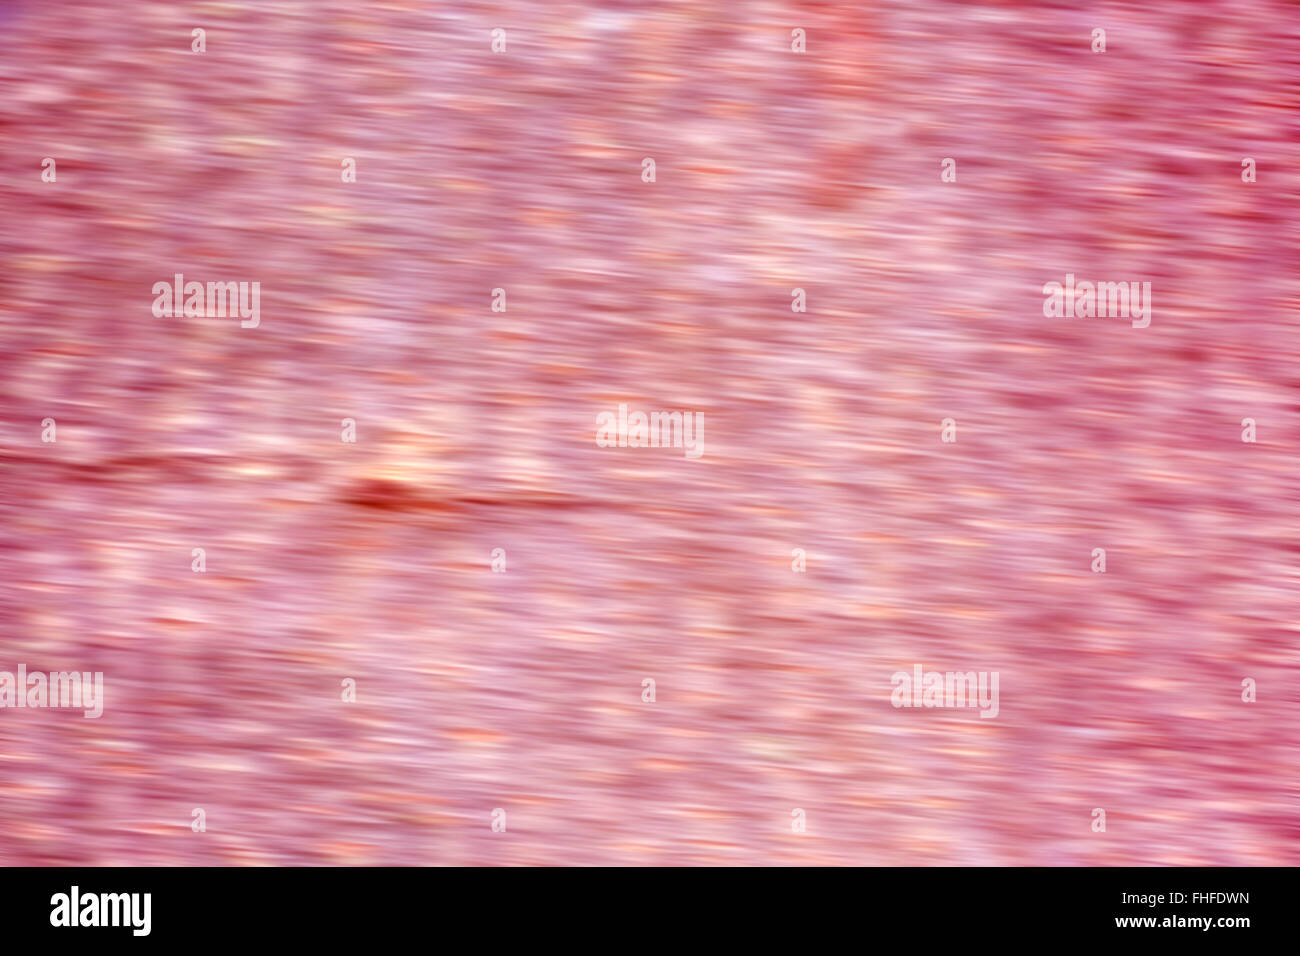 Abstract background made of blurred bark. Stock Photo